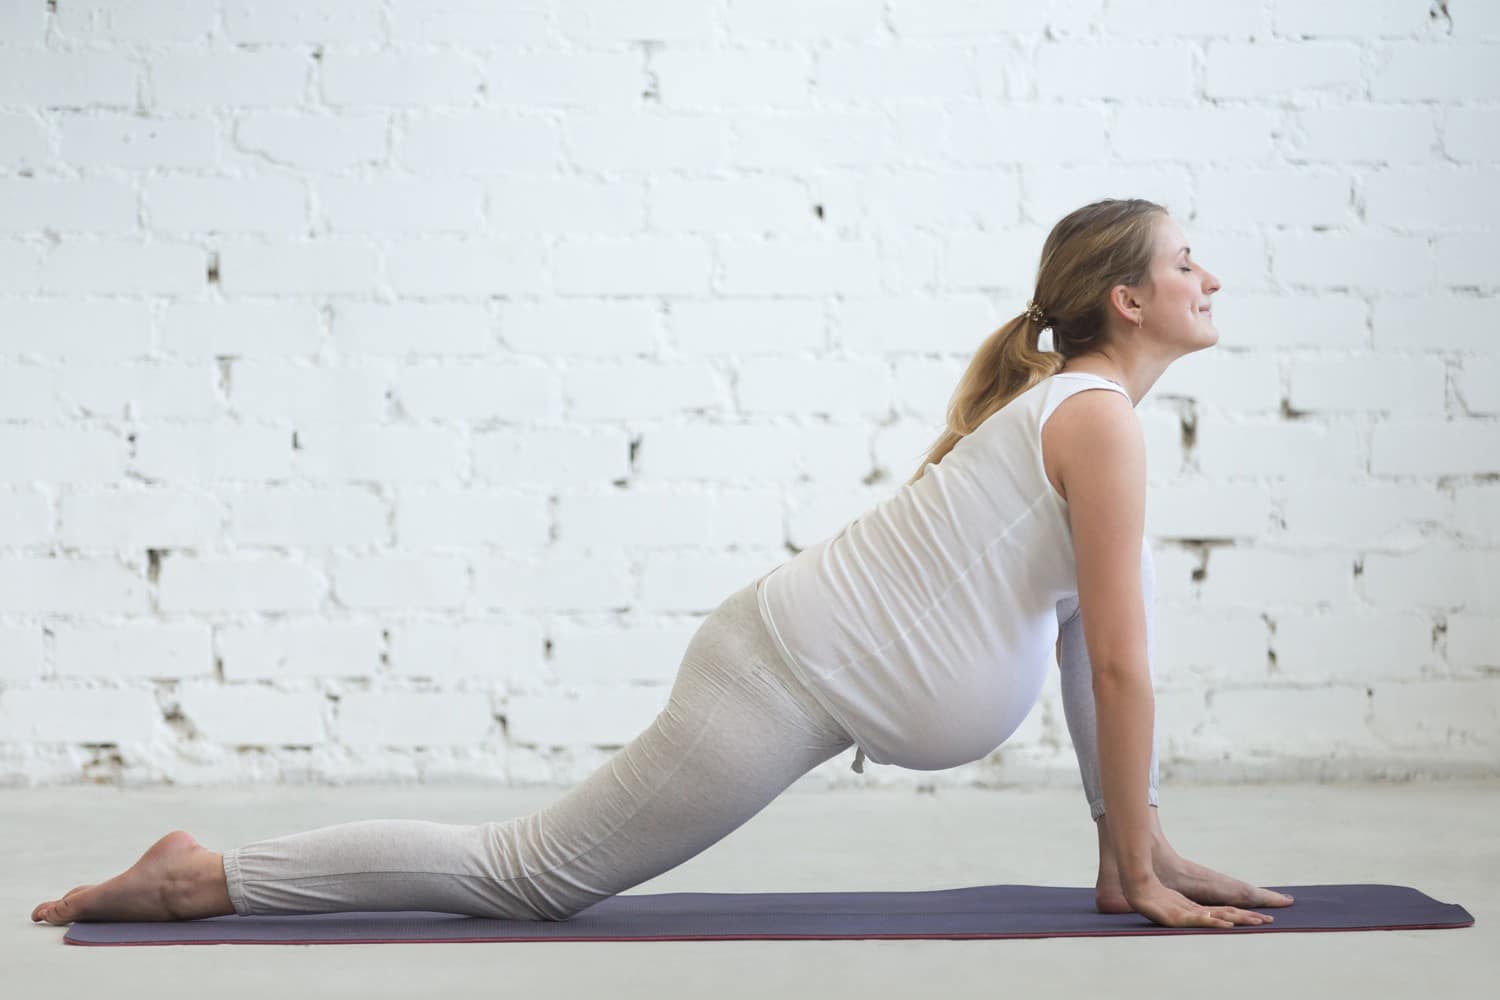 Yin Yoga is not good for pregnant women